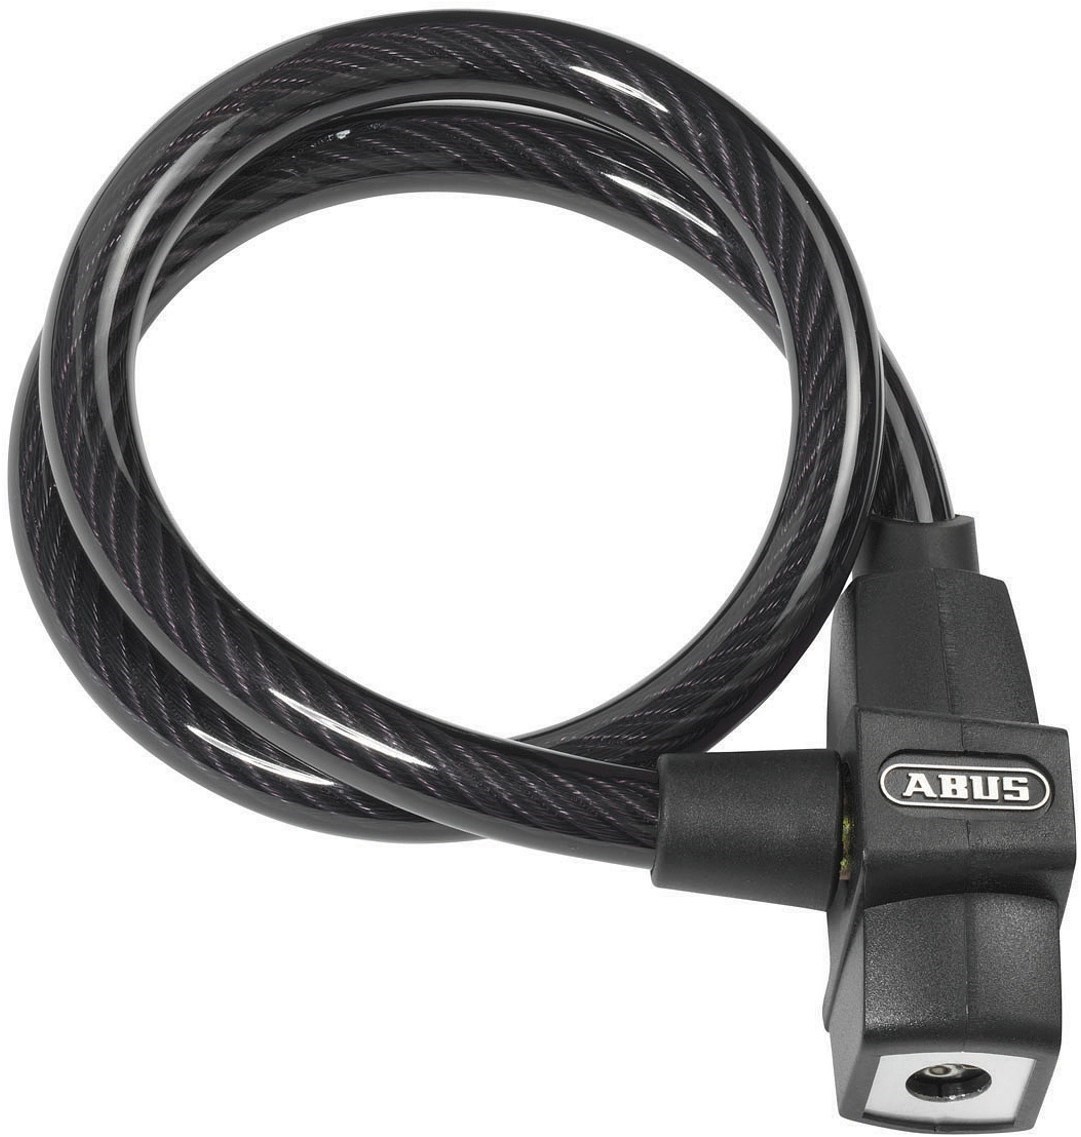 Abus Primo 590 Cable Lock product image